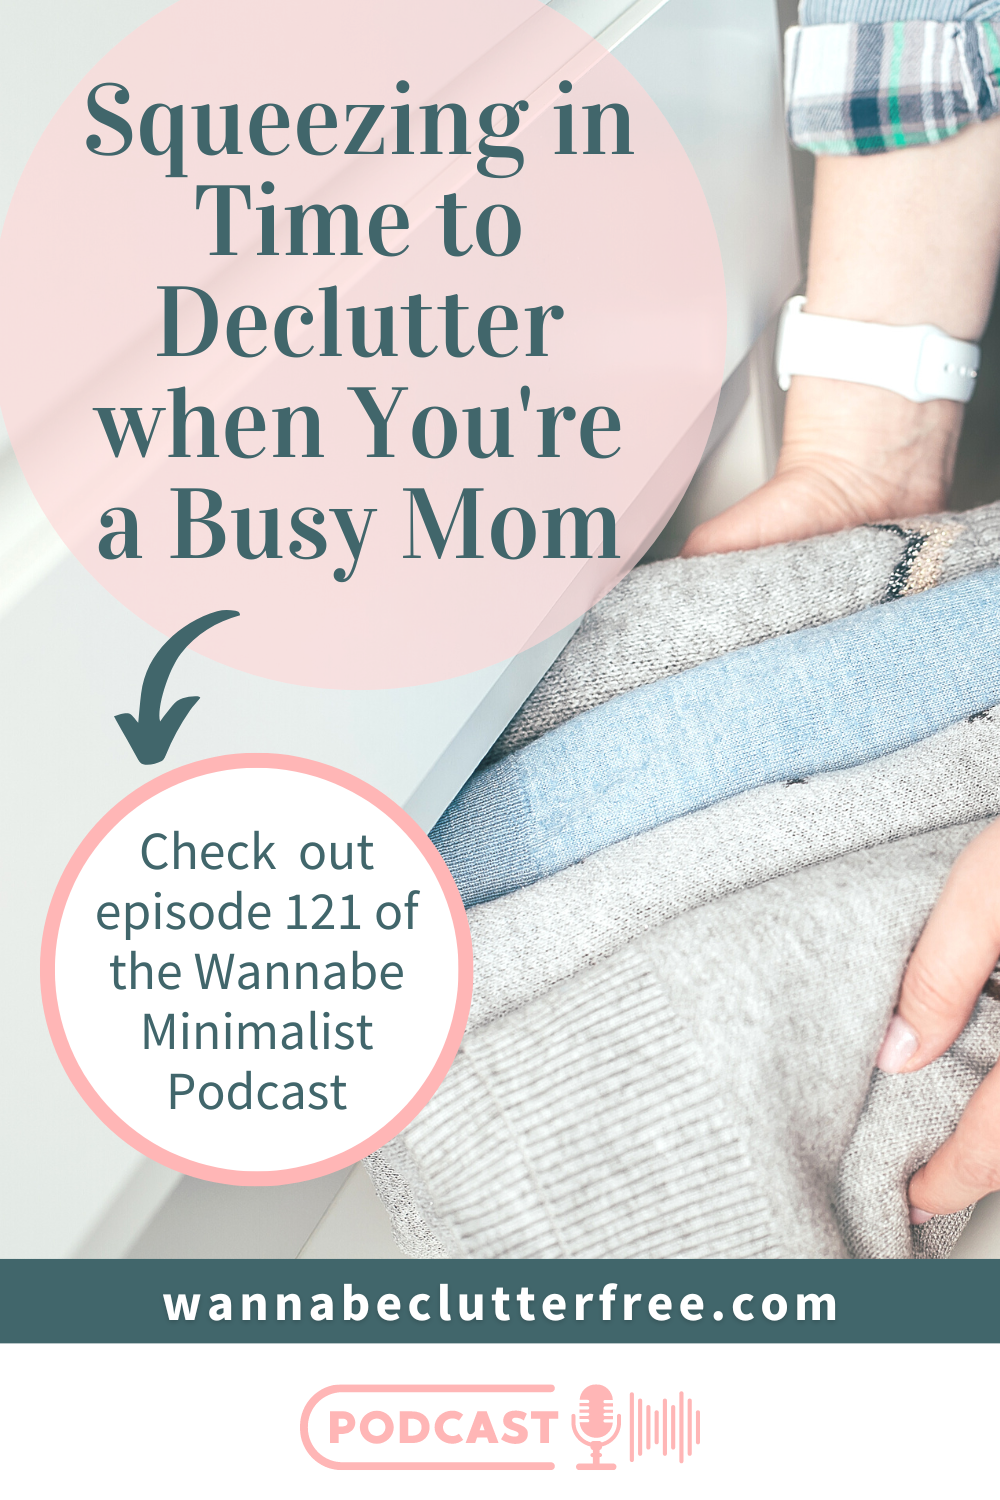 Squeezing in Time to Declutter when You're a Busy Mom